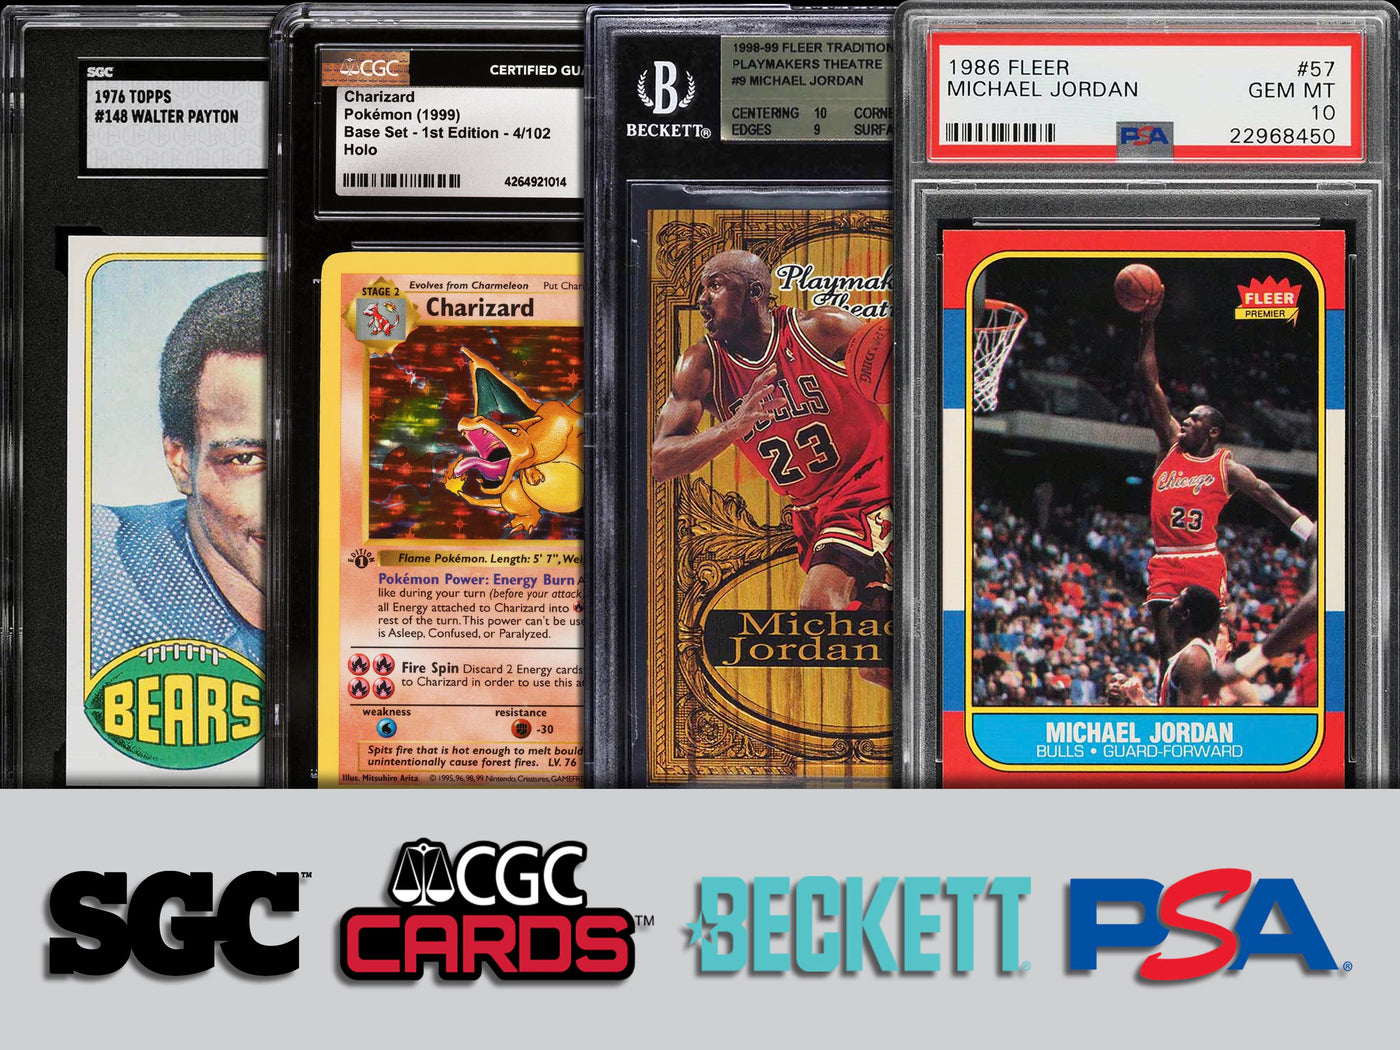 Four cards in graded slabs, from left to right there is a Walter Payton Rookie Card in an SGC slab, a Charizard 1st Edition Holo in a CGC slab, Playmaker Theatre Michael Jordan card in a BGS slab, Michael Jordan Rookie card in a PSA slab